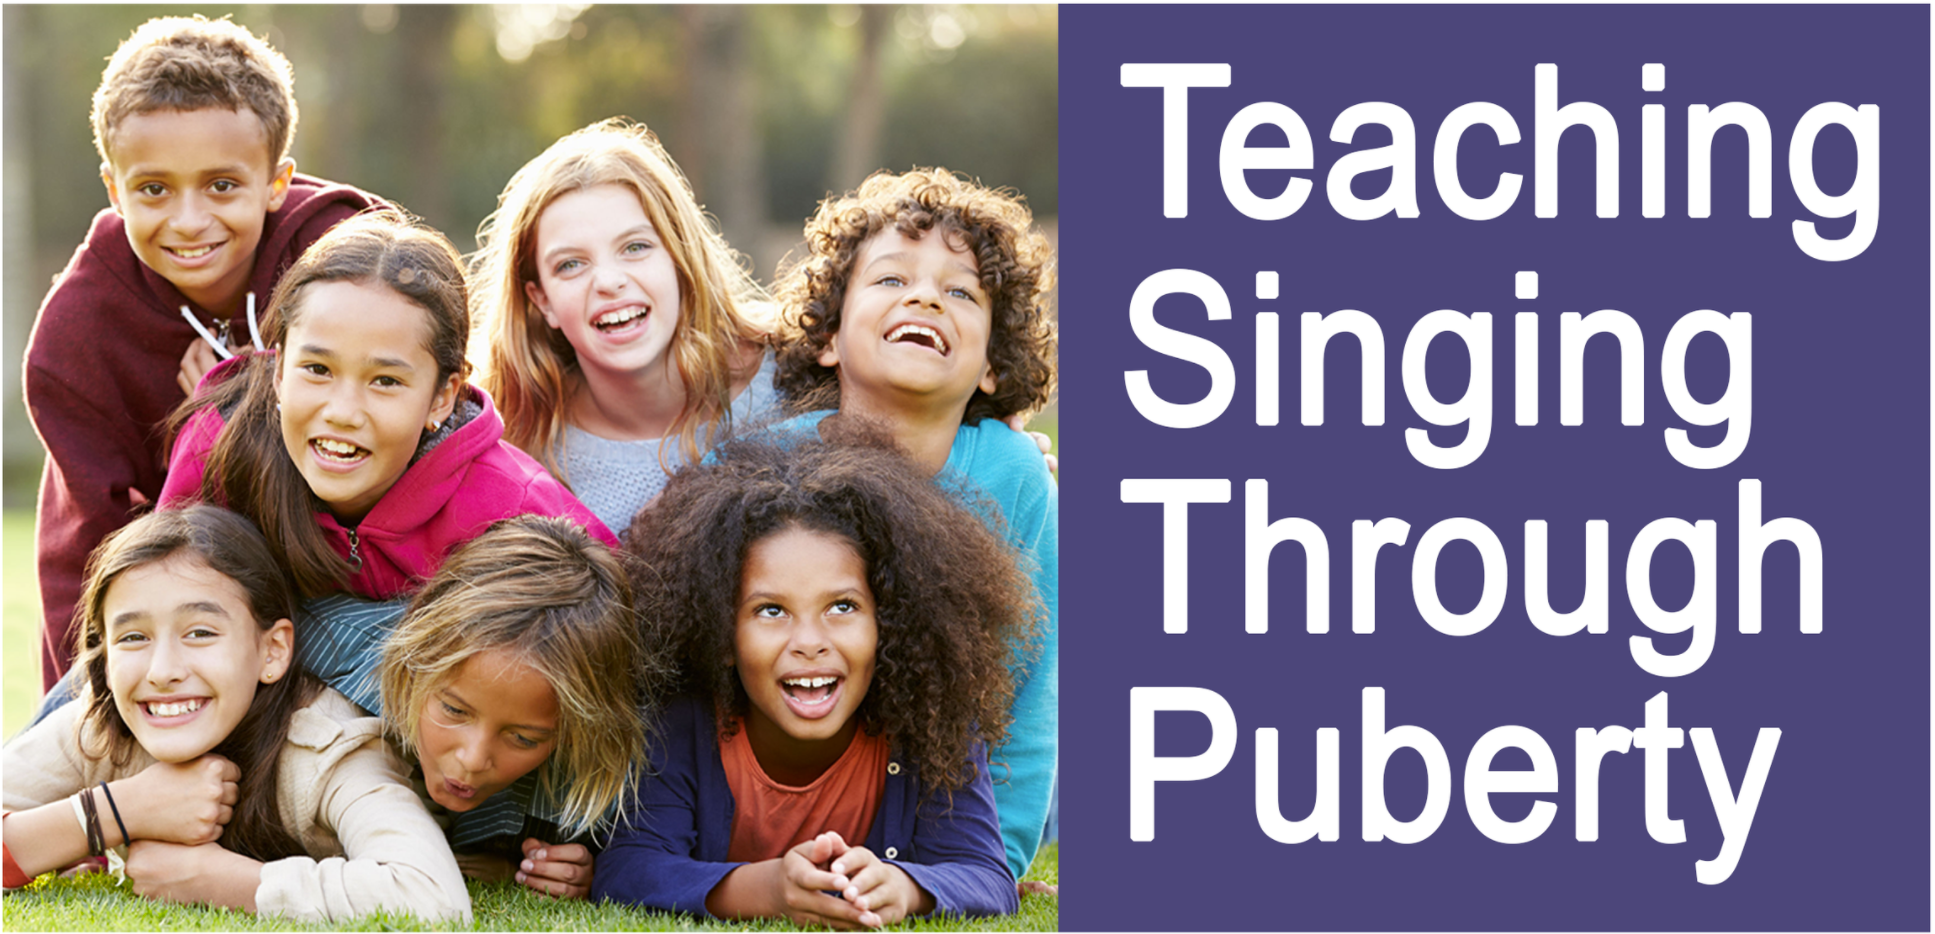 Teaching Singing Through Puberty logo with group of children